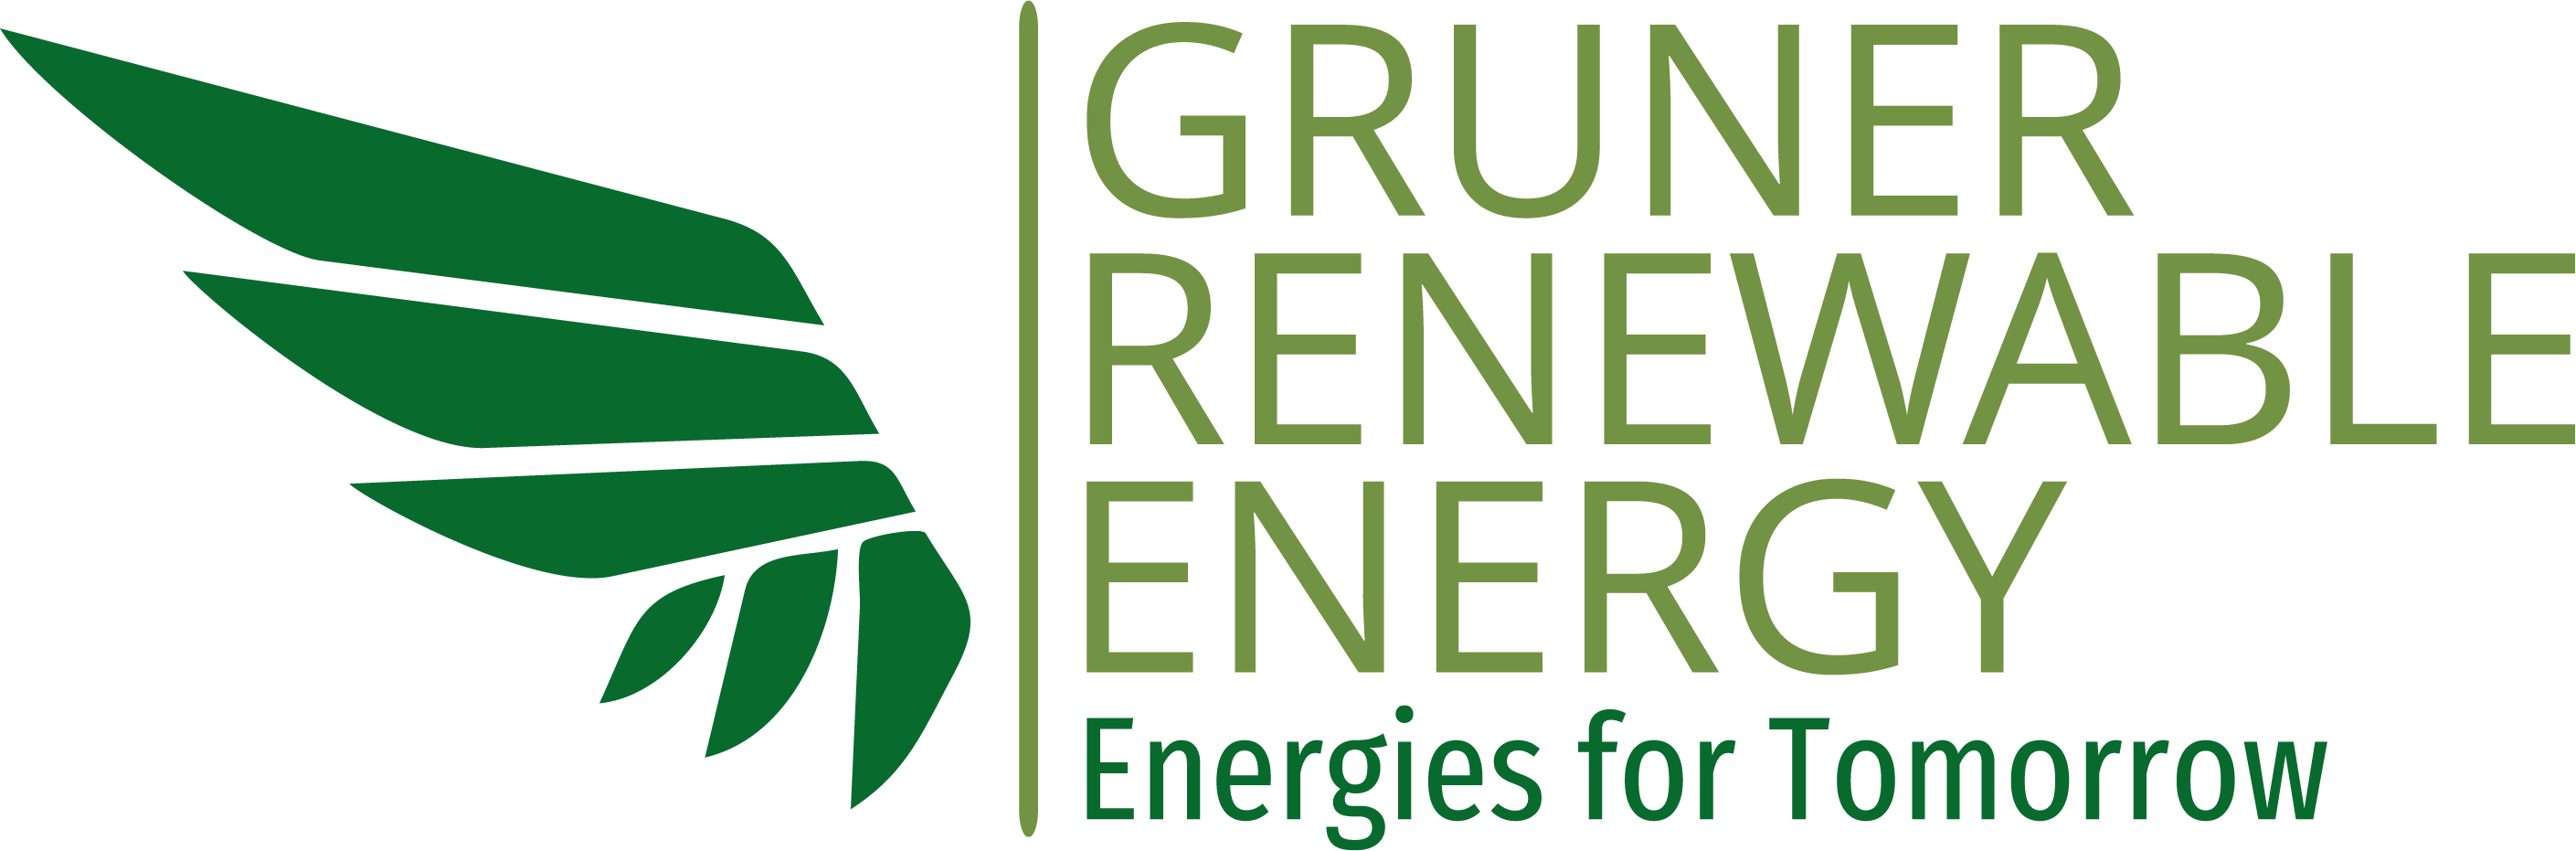 Gruner Renewable Energy Secures US$60 Million to Expand CBG Projects in India – EQ